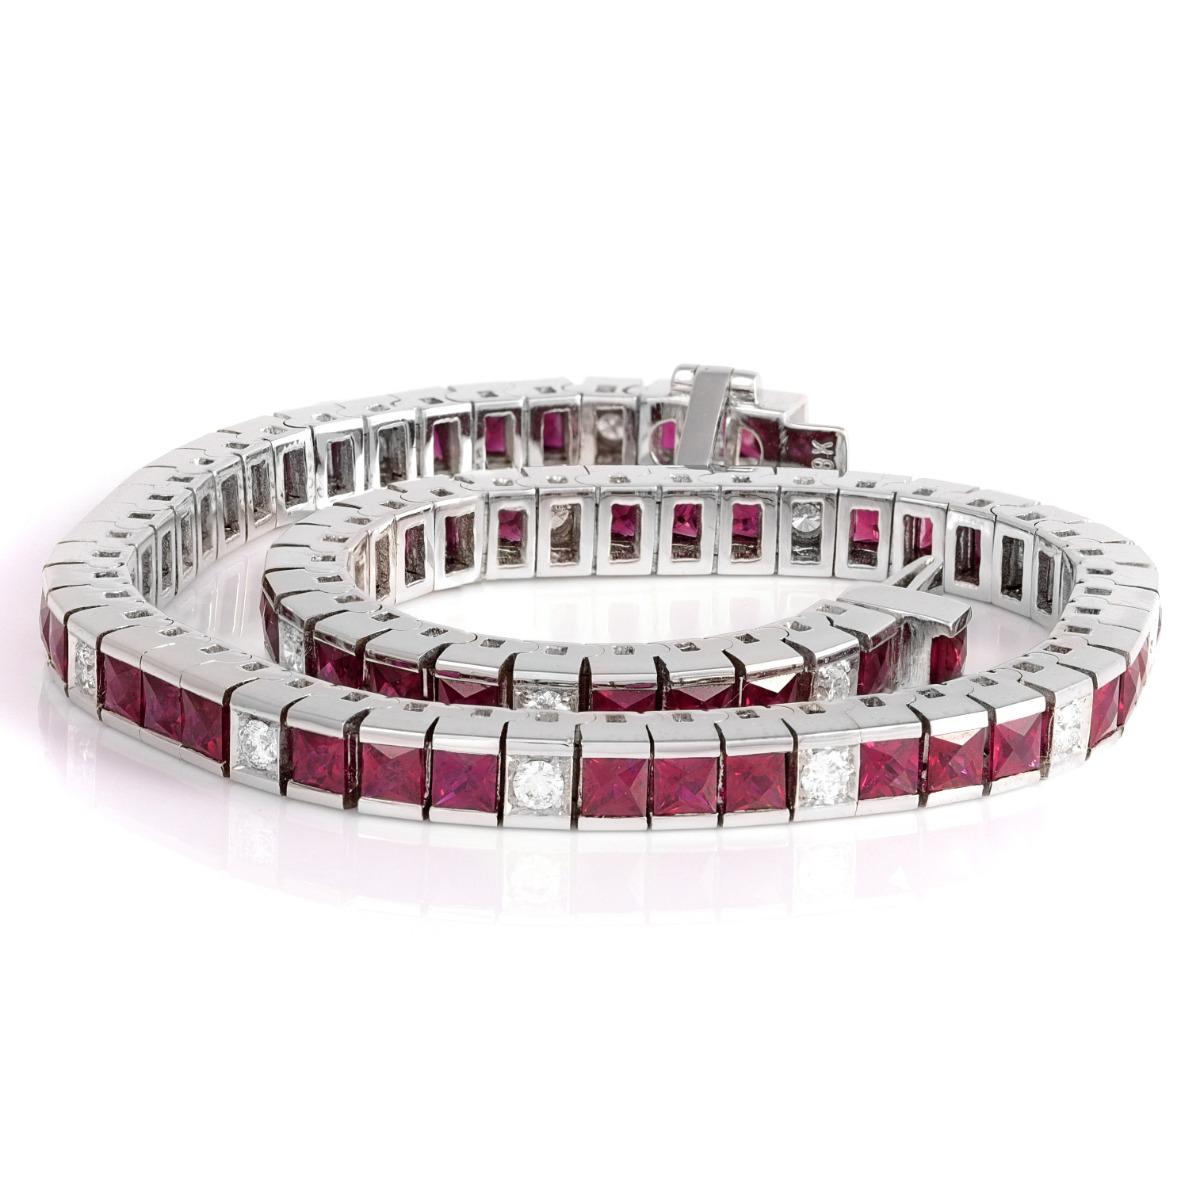 5.75 carats of natural vivid princess-cut rubies are punctuated by 0.50 carats of white brilliant-cut diamonds in this update on the classic line bracelet. A beautiful example of understated classic jewelry, this bracelet can be worn alone or